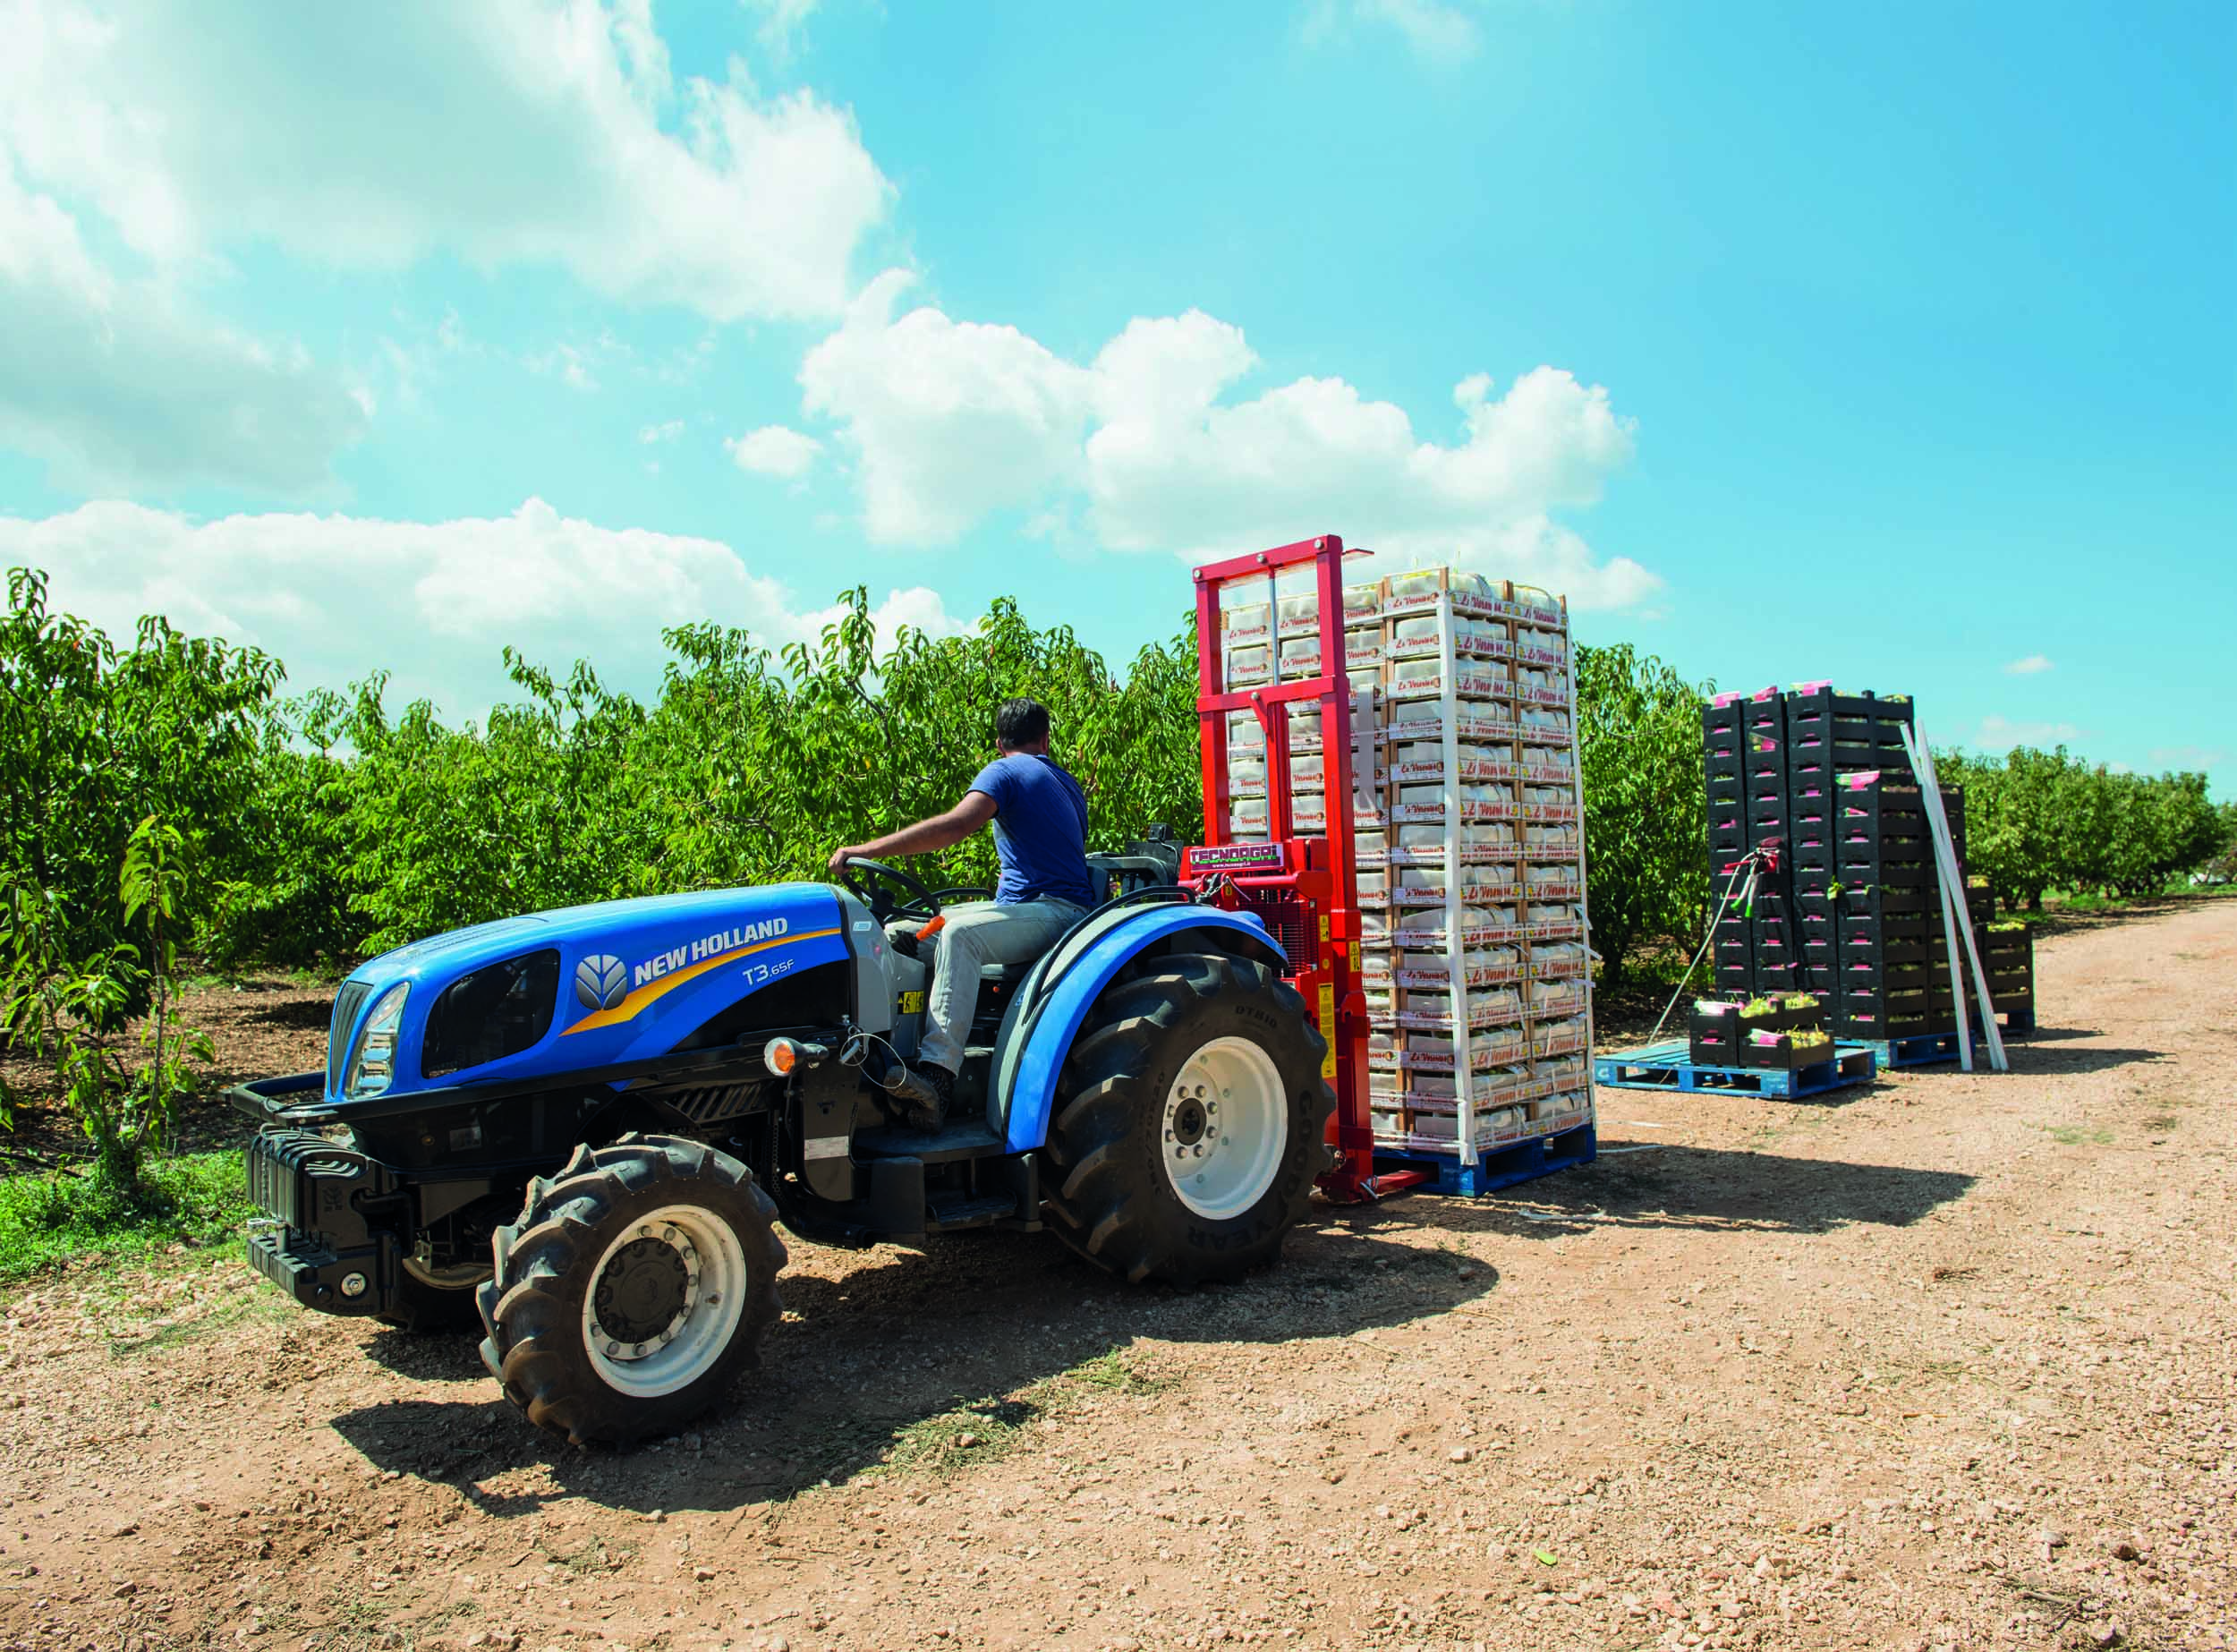 NEW HOLLAND AGRICULTURE T3F WINS TOTY® 2015 – BEST OF SPECIALIZED AWARD, AN AMAZING ACHIEVEMENT IN THE SPECIALIZED SEGMENT